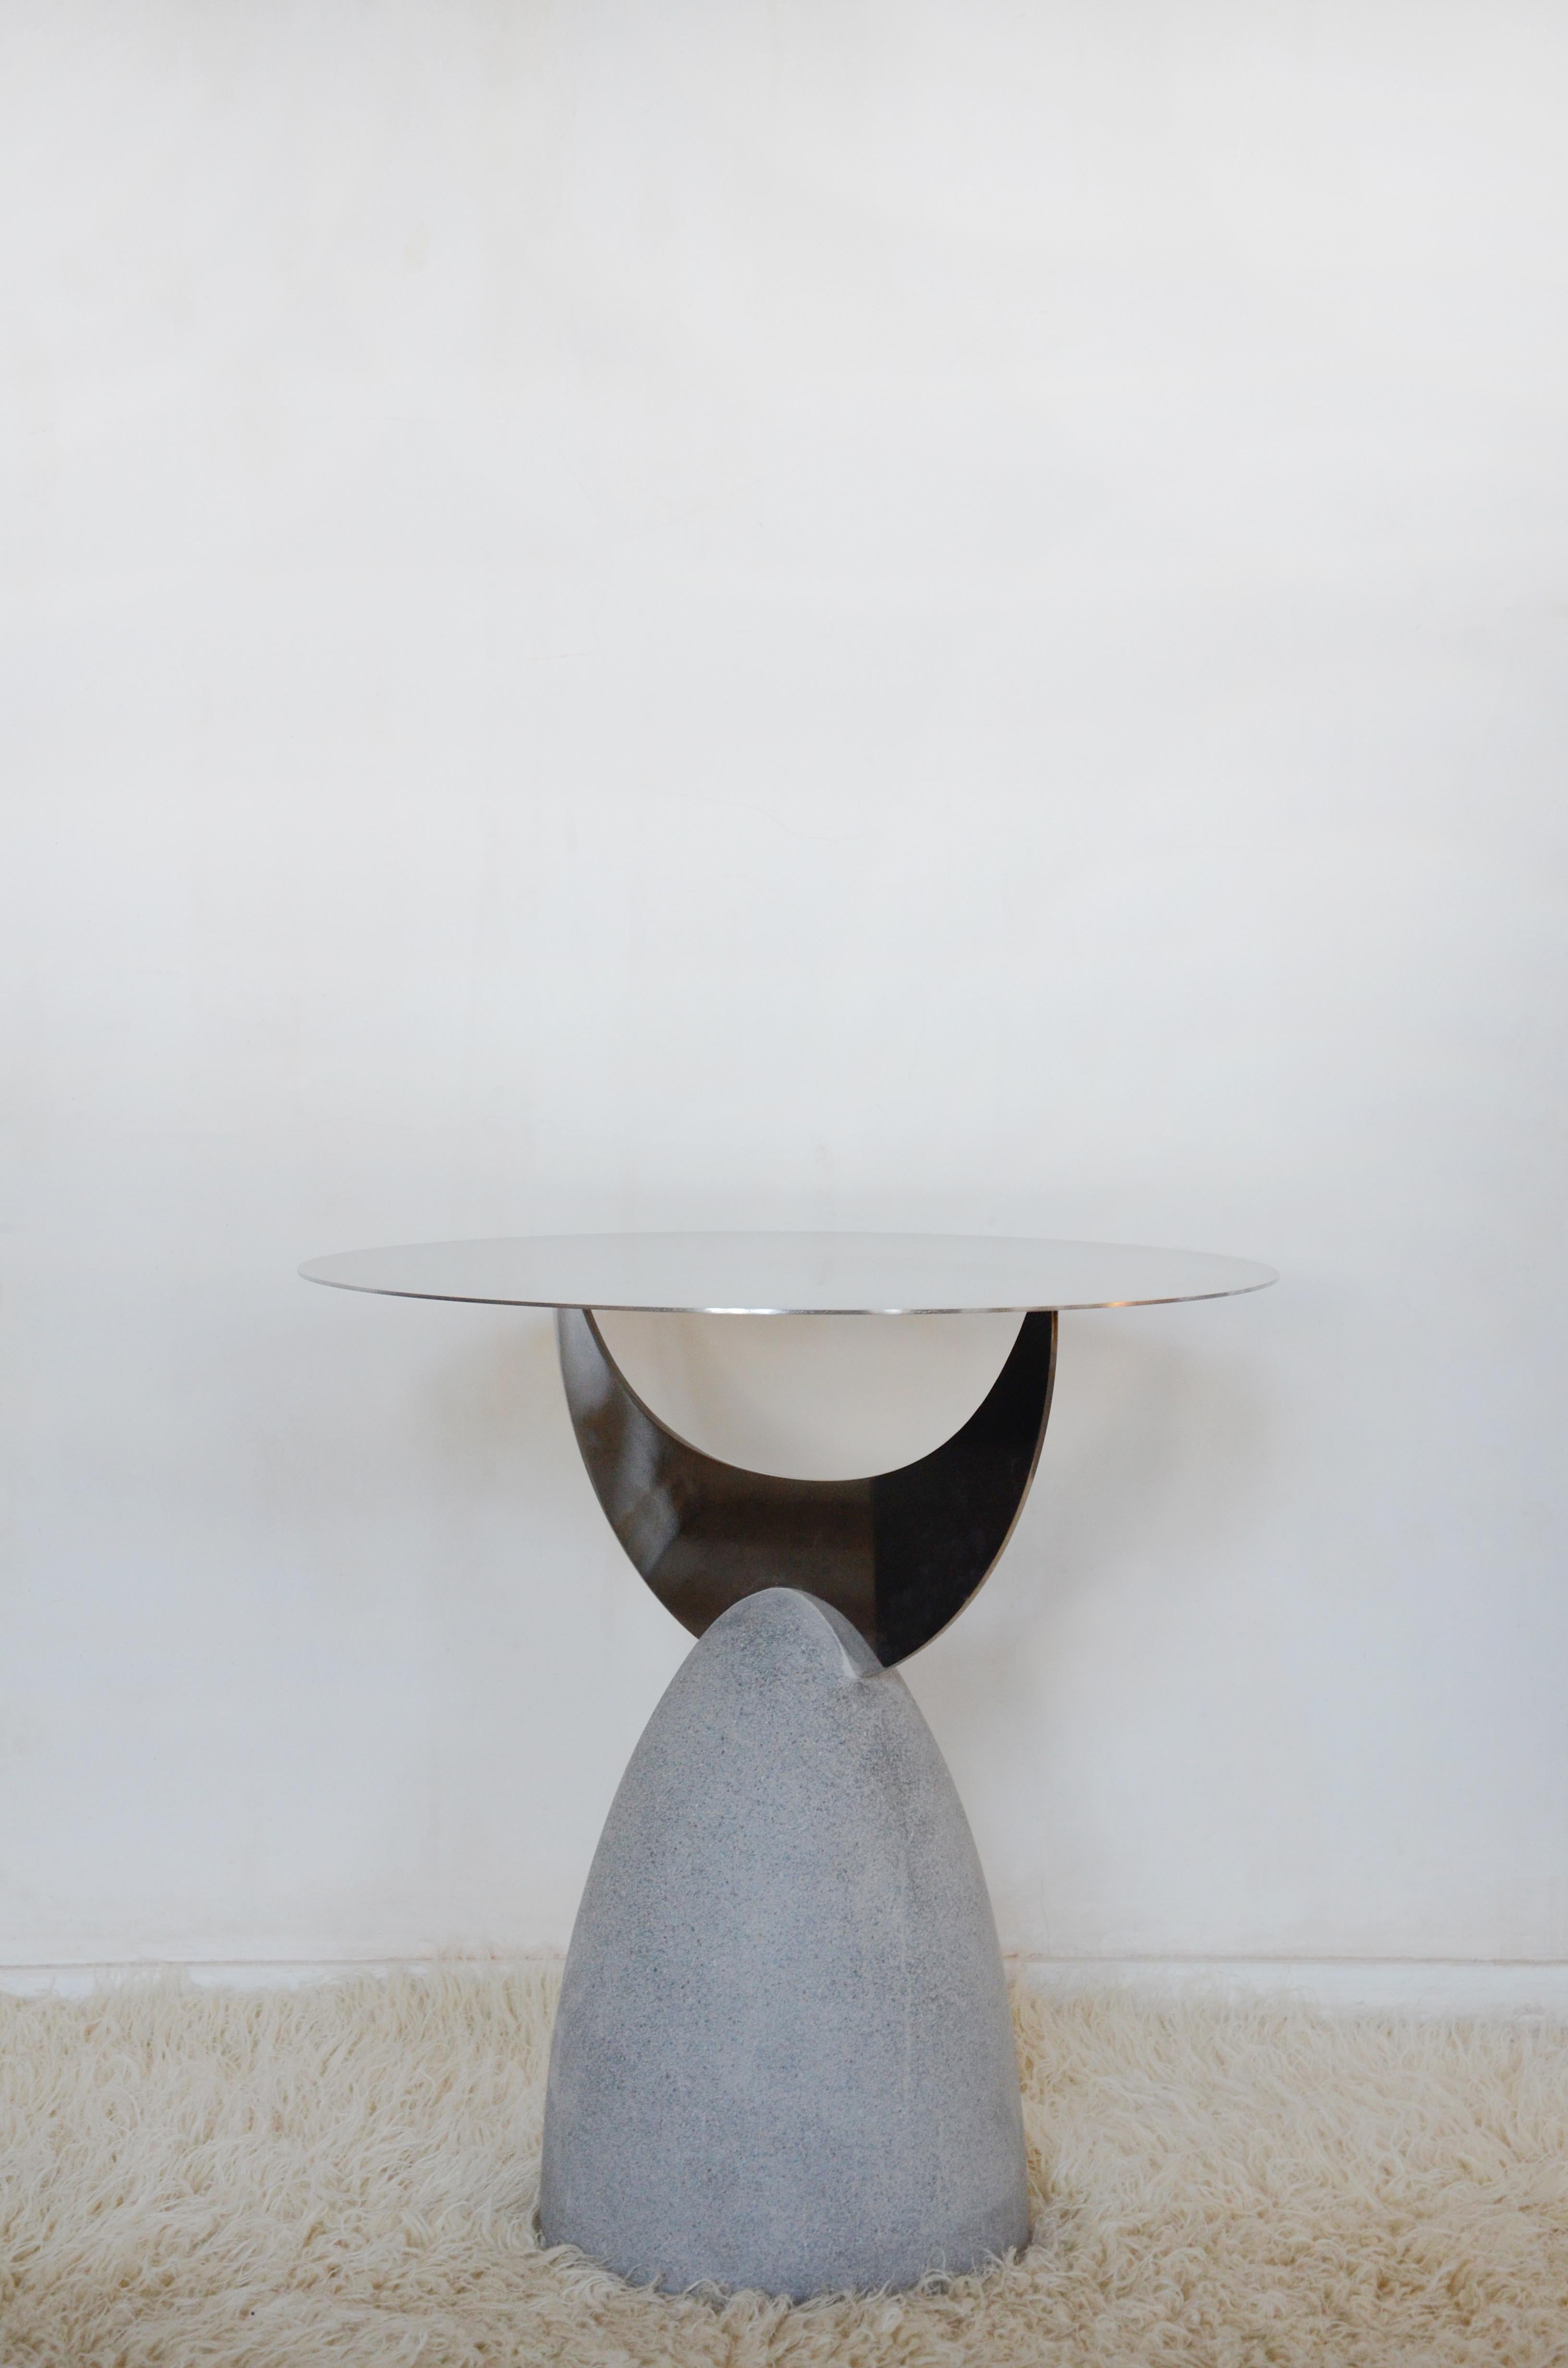 This unique, sculptural metal and stone side table is expertly hand-crafted and designed by Rooms Studio in Tbilisi, Georgia. The piece features a circular mirror-finish stainless steel top, positioned atop a stainless steel crescent moon, with a